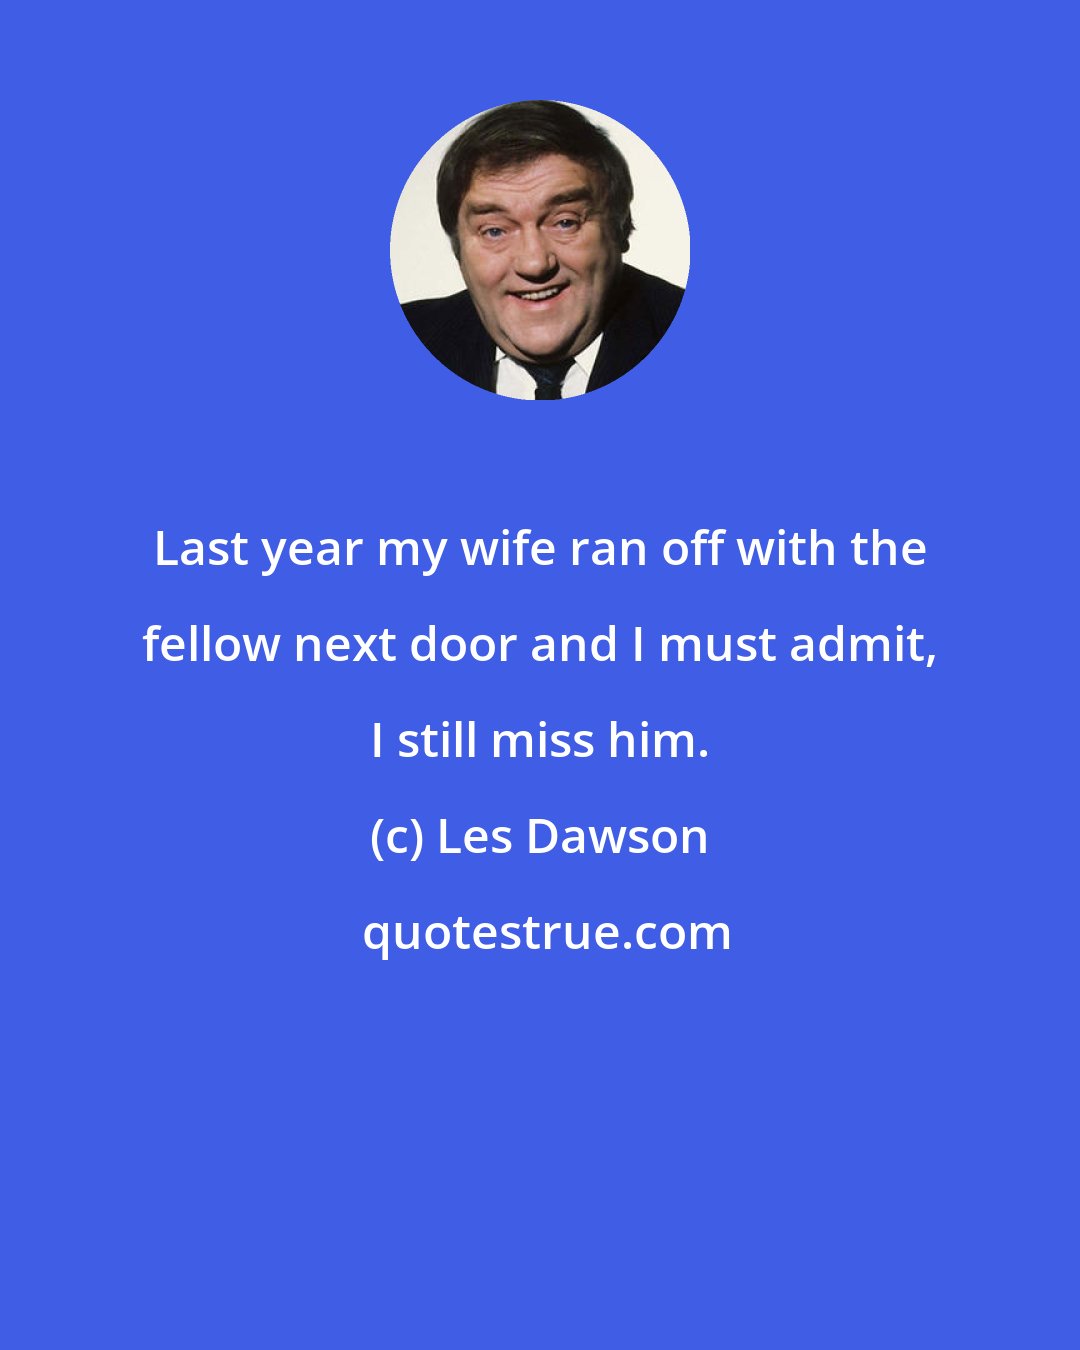 Les Dawson: Last year my wife ran off with the fellow next door and I must admit, I still miss him.